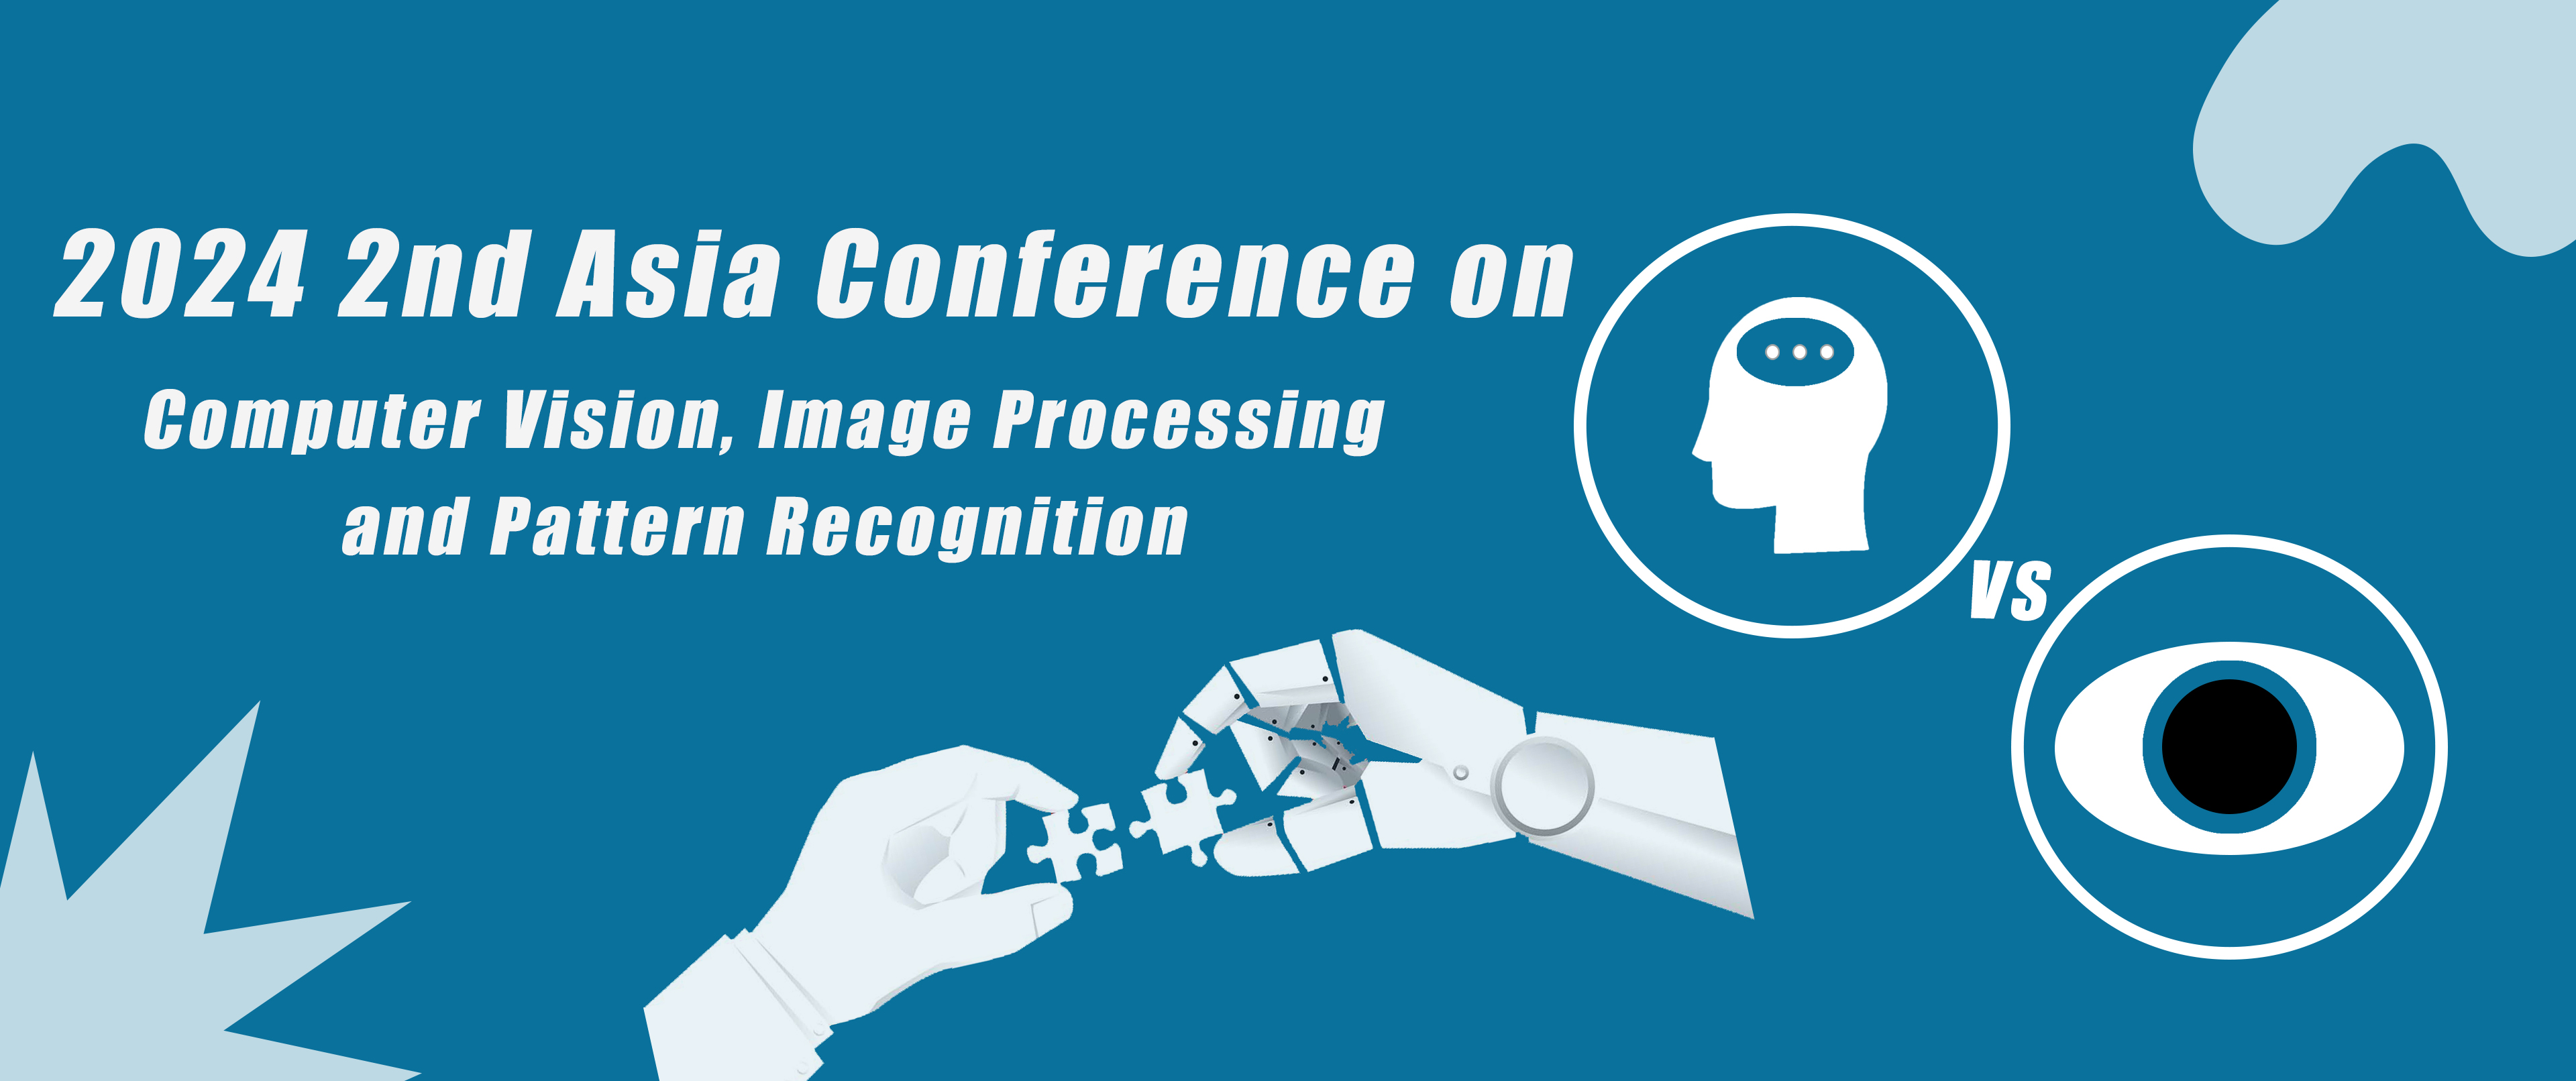 2024 2nd Asia Conference on Computer Vision, Image Processing and Pattern Recognition (CVIPPR 2024), Xiamen, Fujian, China